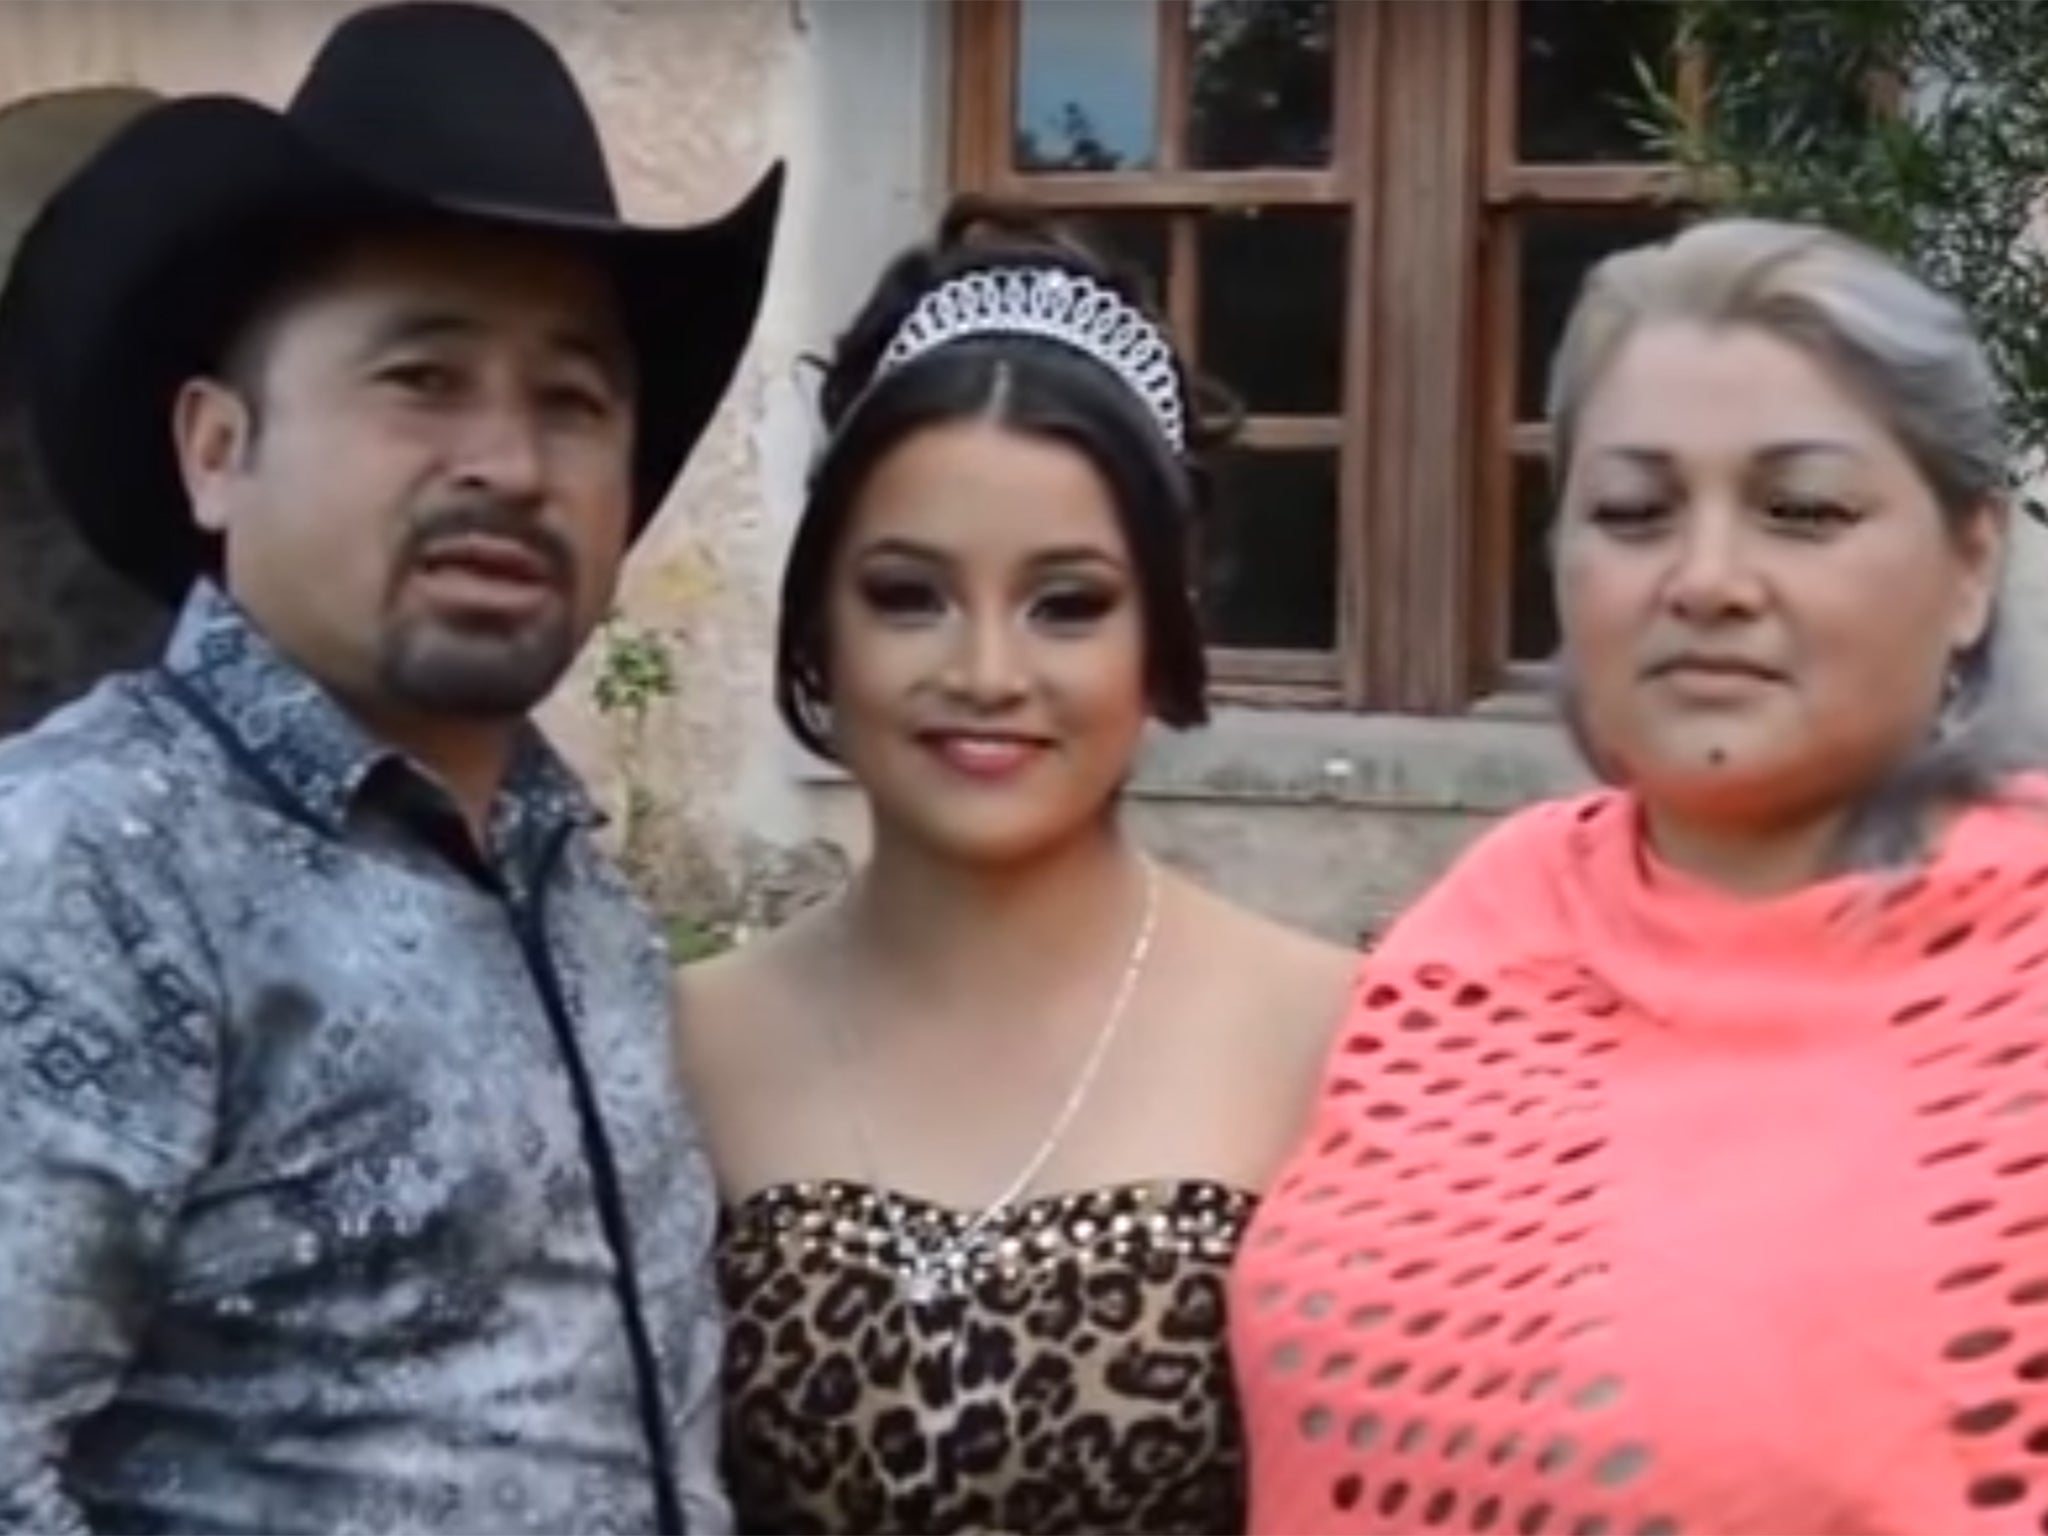 Invitation to girl's 15th birthday party goes viral and attracts 1.2 million attendees in Mexico